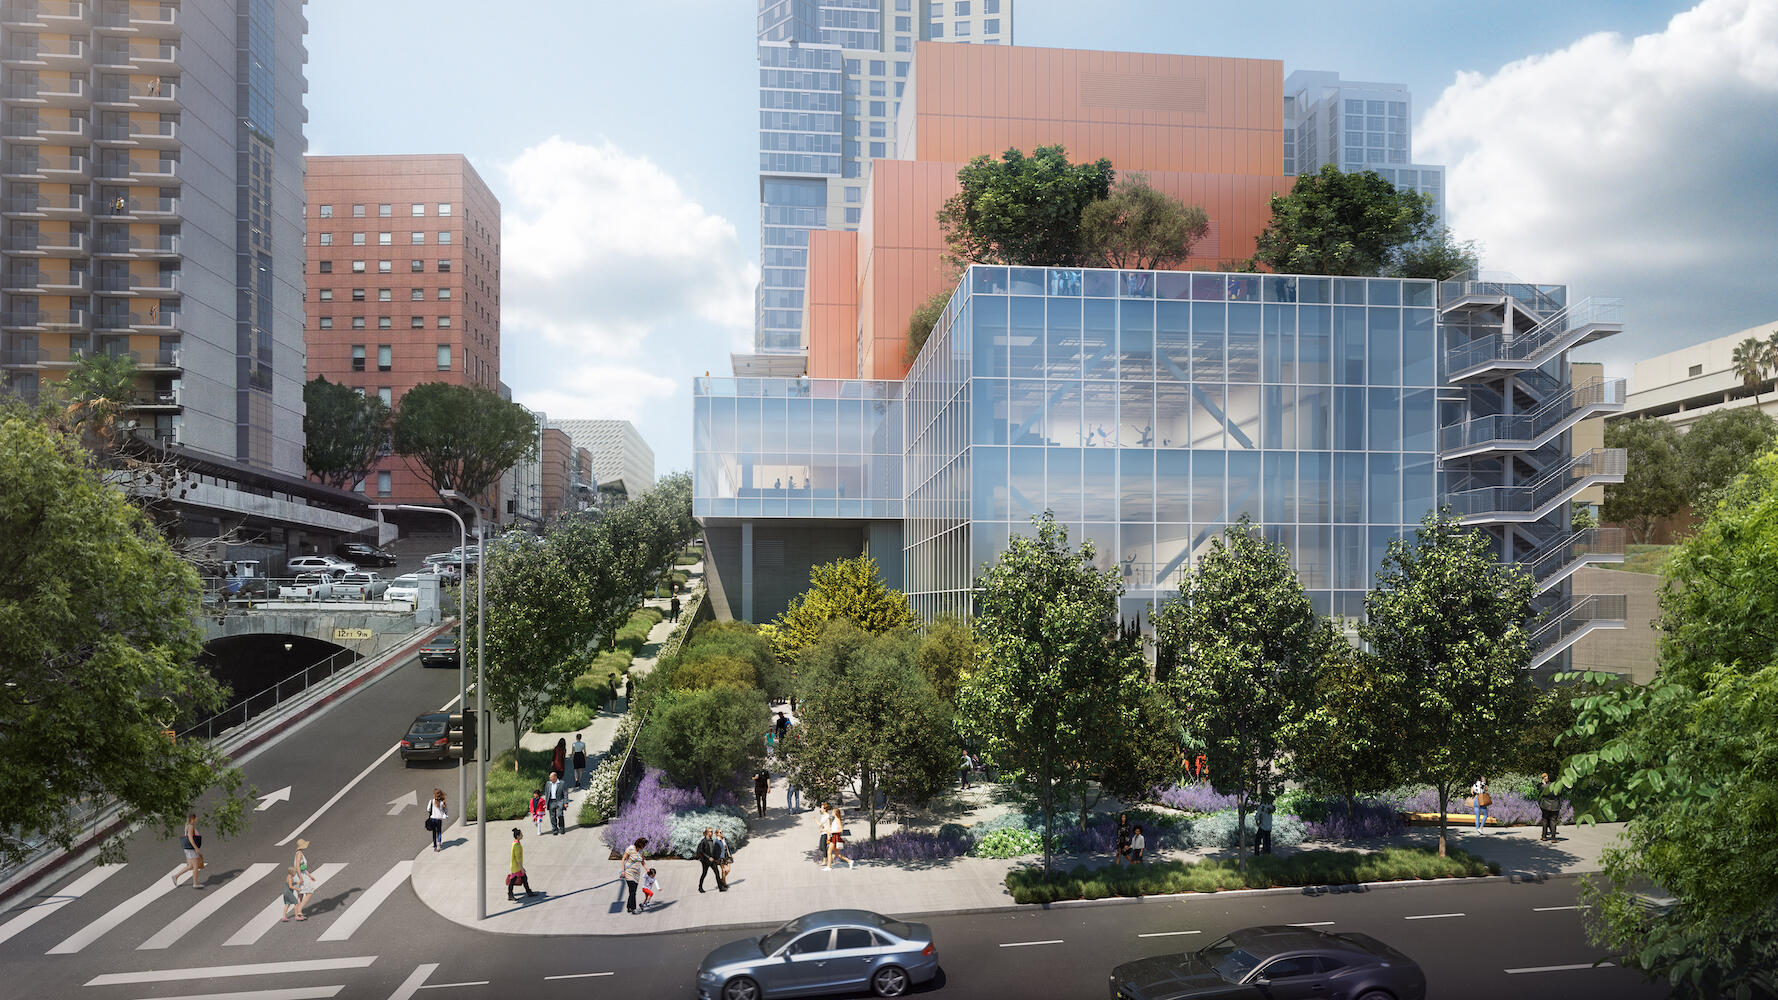 Frank Gehry’s Colburn School Expansion Breaks Ground in Downtown Los Angeles